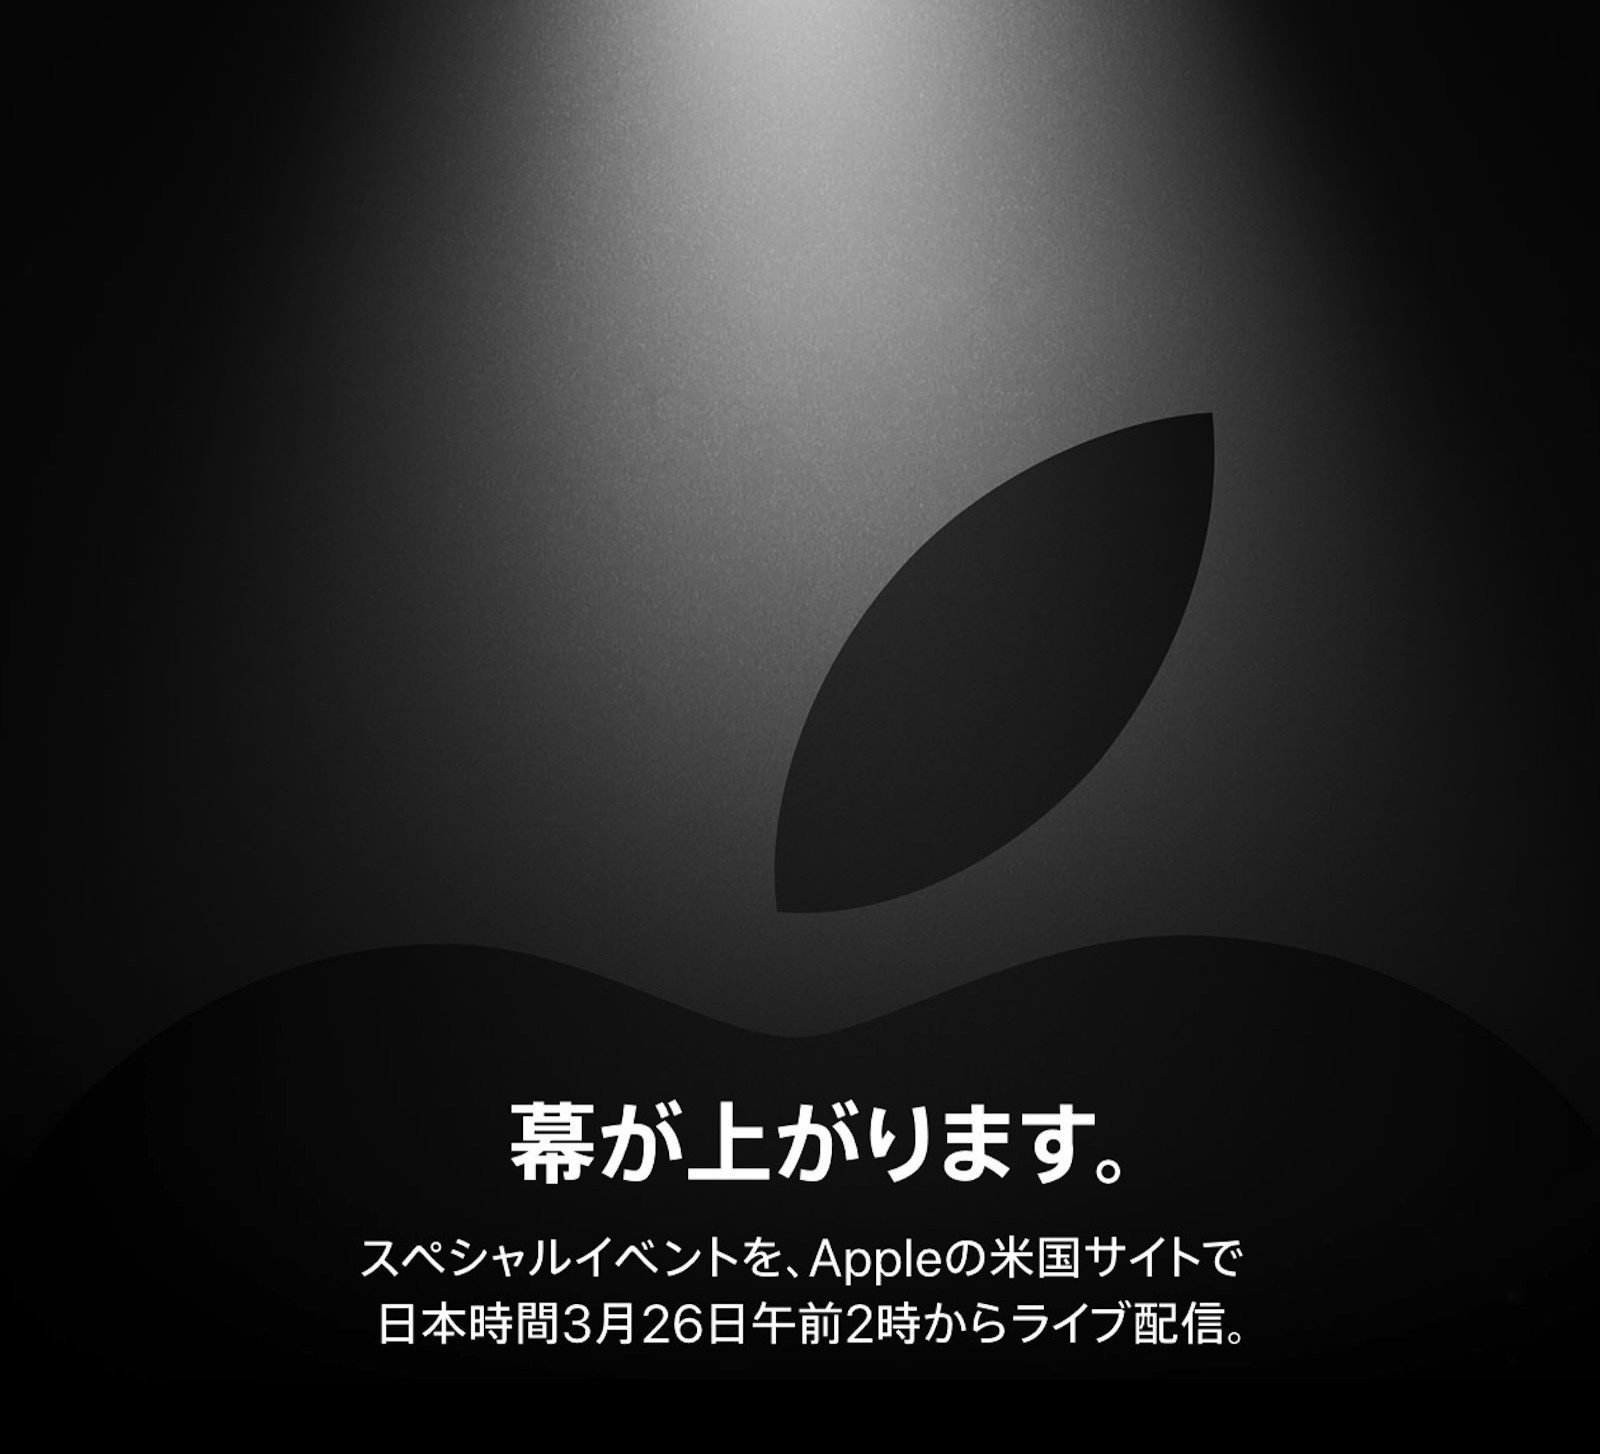 Apple-Special-Event.jpg